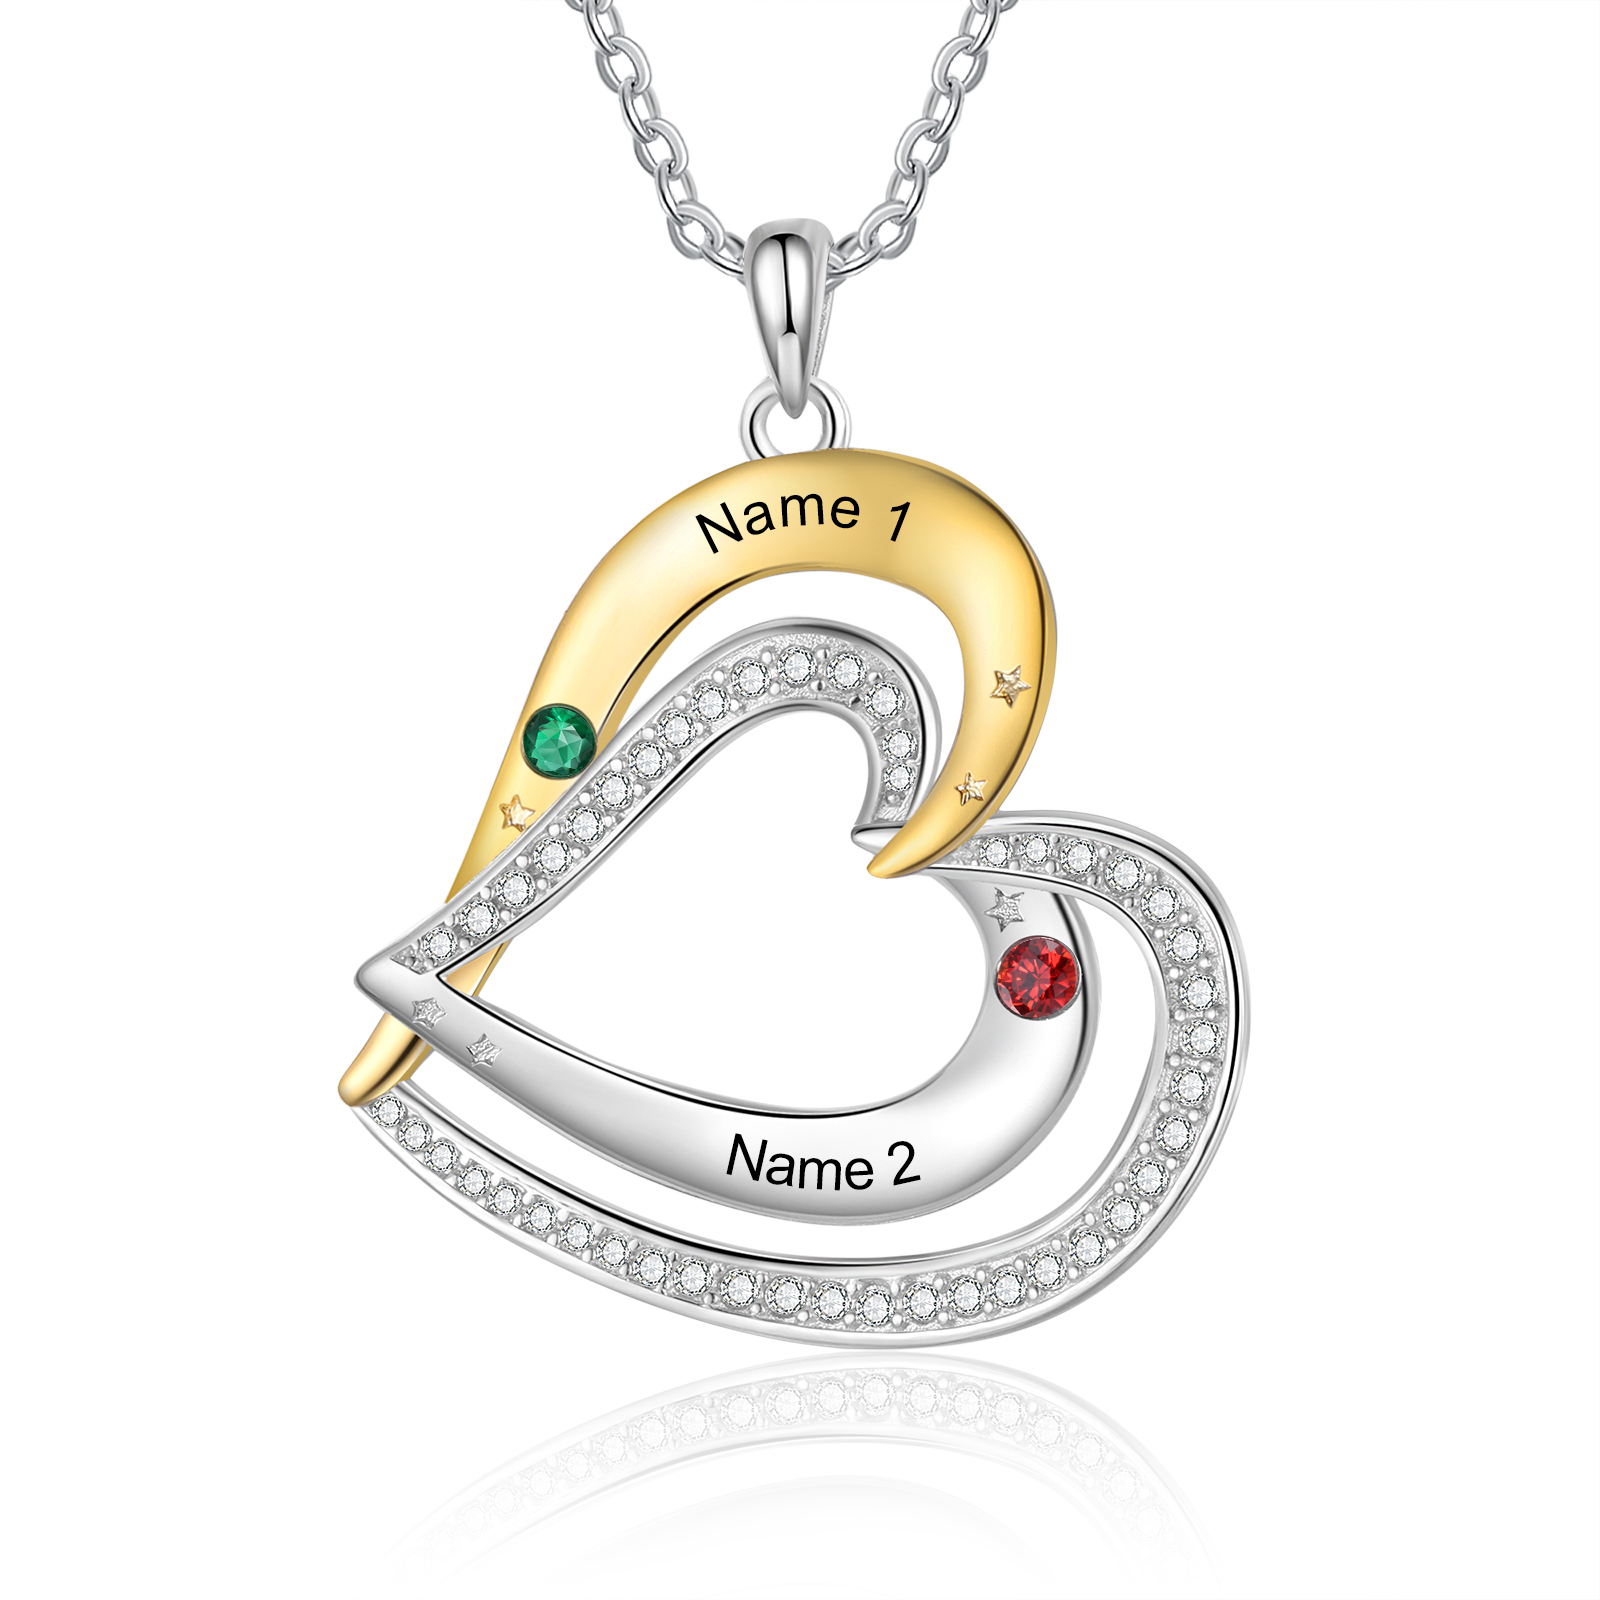 2 Names - Personalized Love Necklace with Customized Name and Birthsto